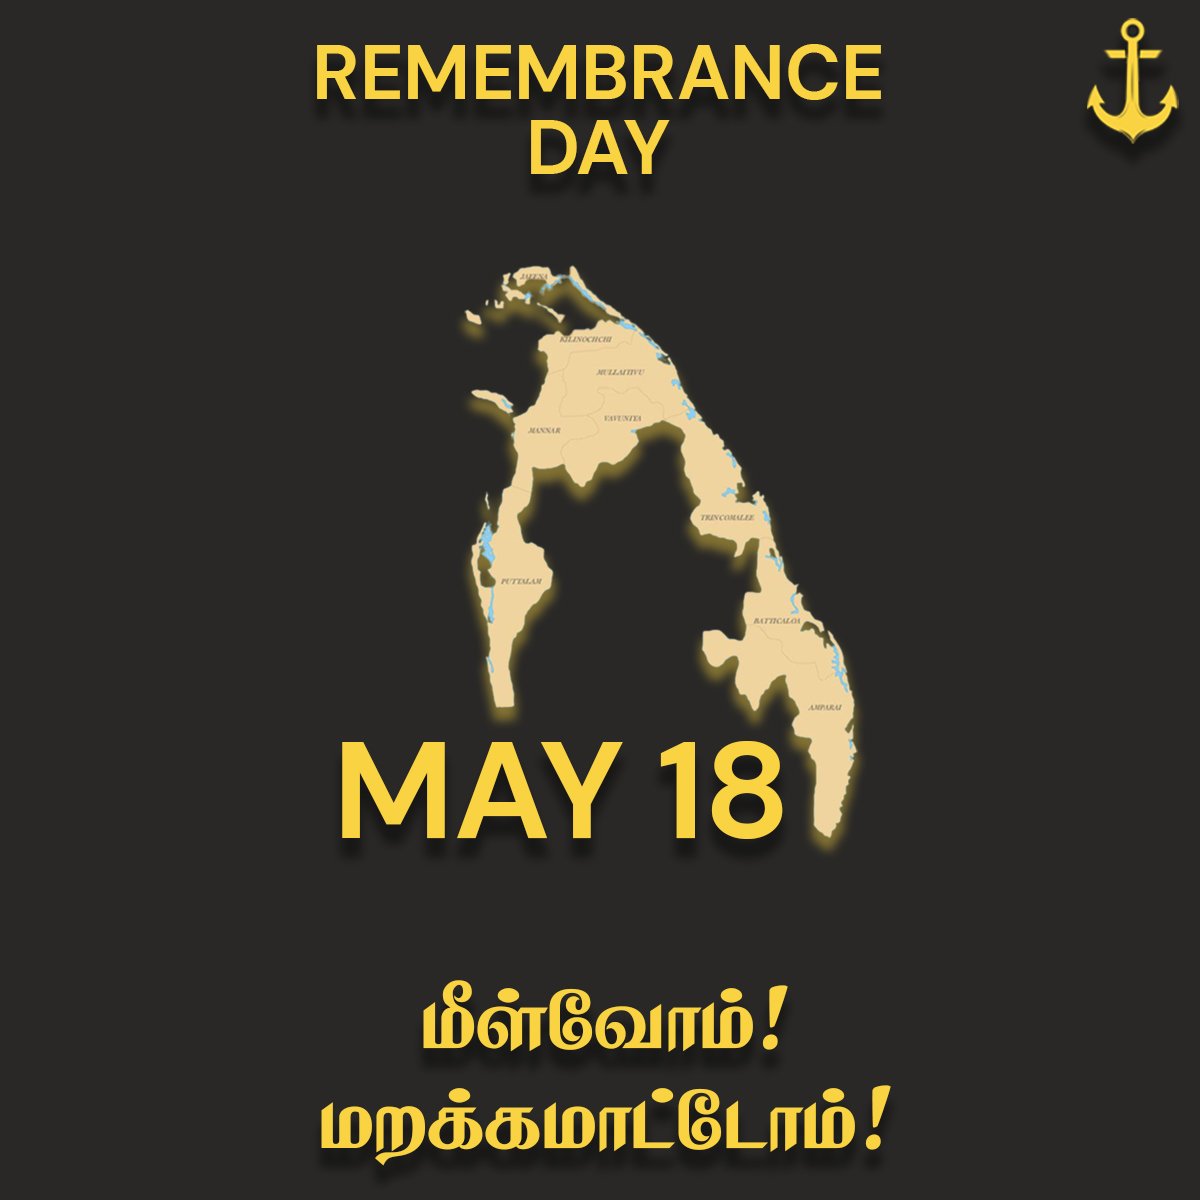 It's been 12 years! Although the war has ended, the battle for the justice for genocide and human rights continues till this day. Yes it's been 12 years, we have overcome it, but we will never forget!

#TamilGenocide #Eelam #srilankangenocide #Mullivaikkal #May18TamilGenocideDay